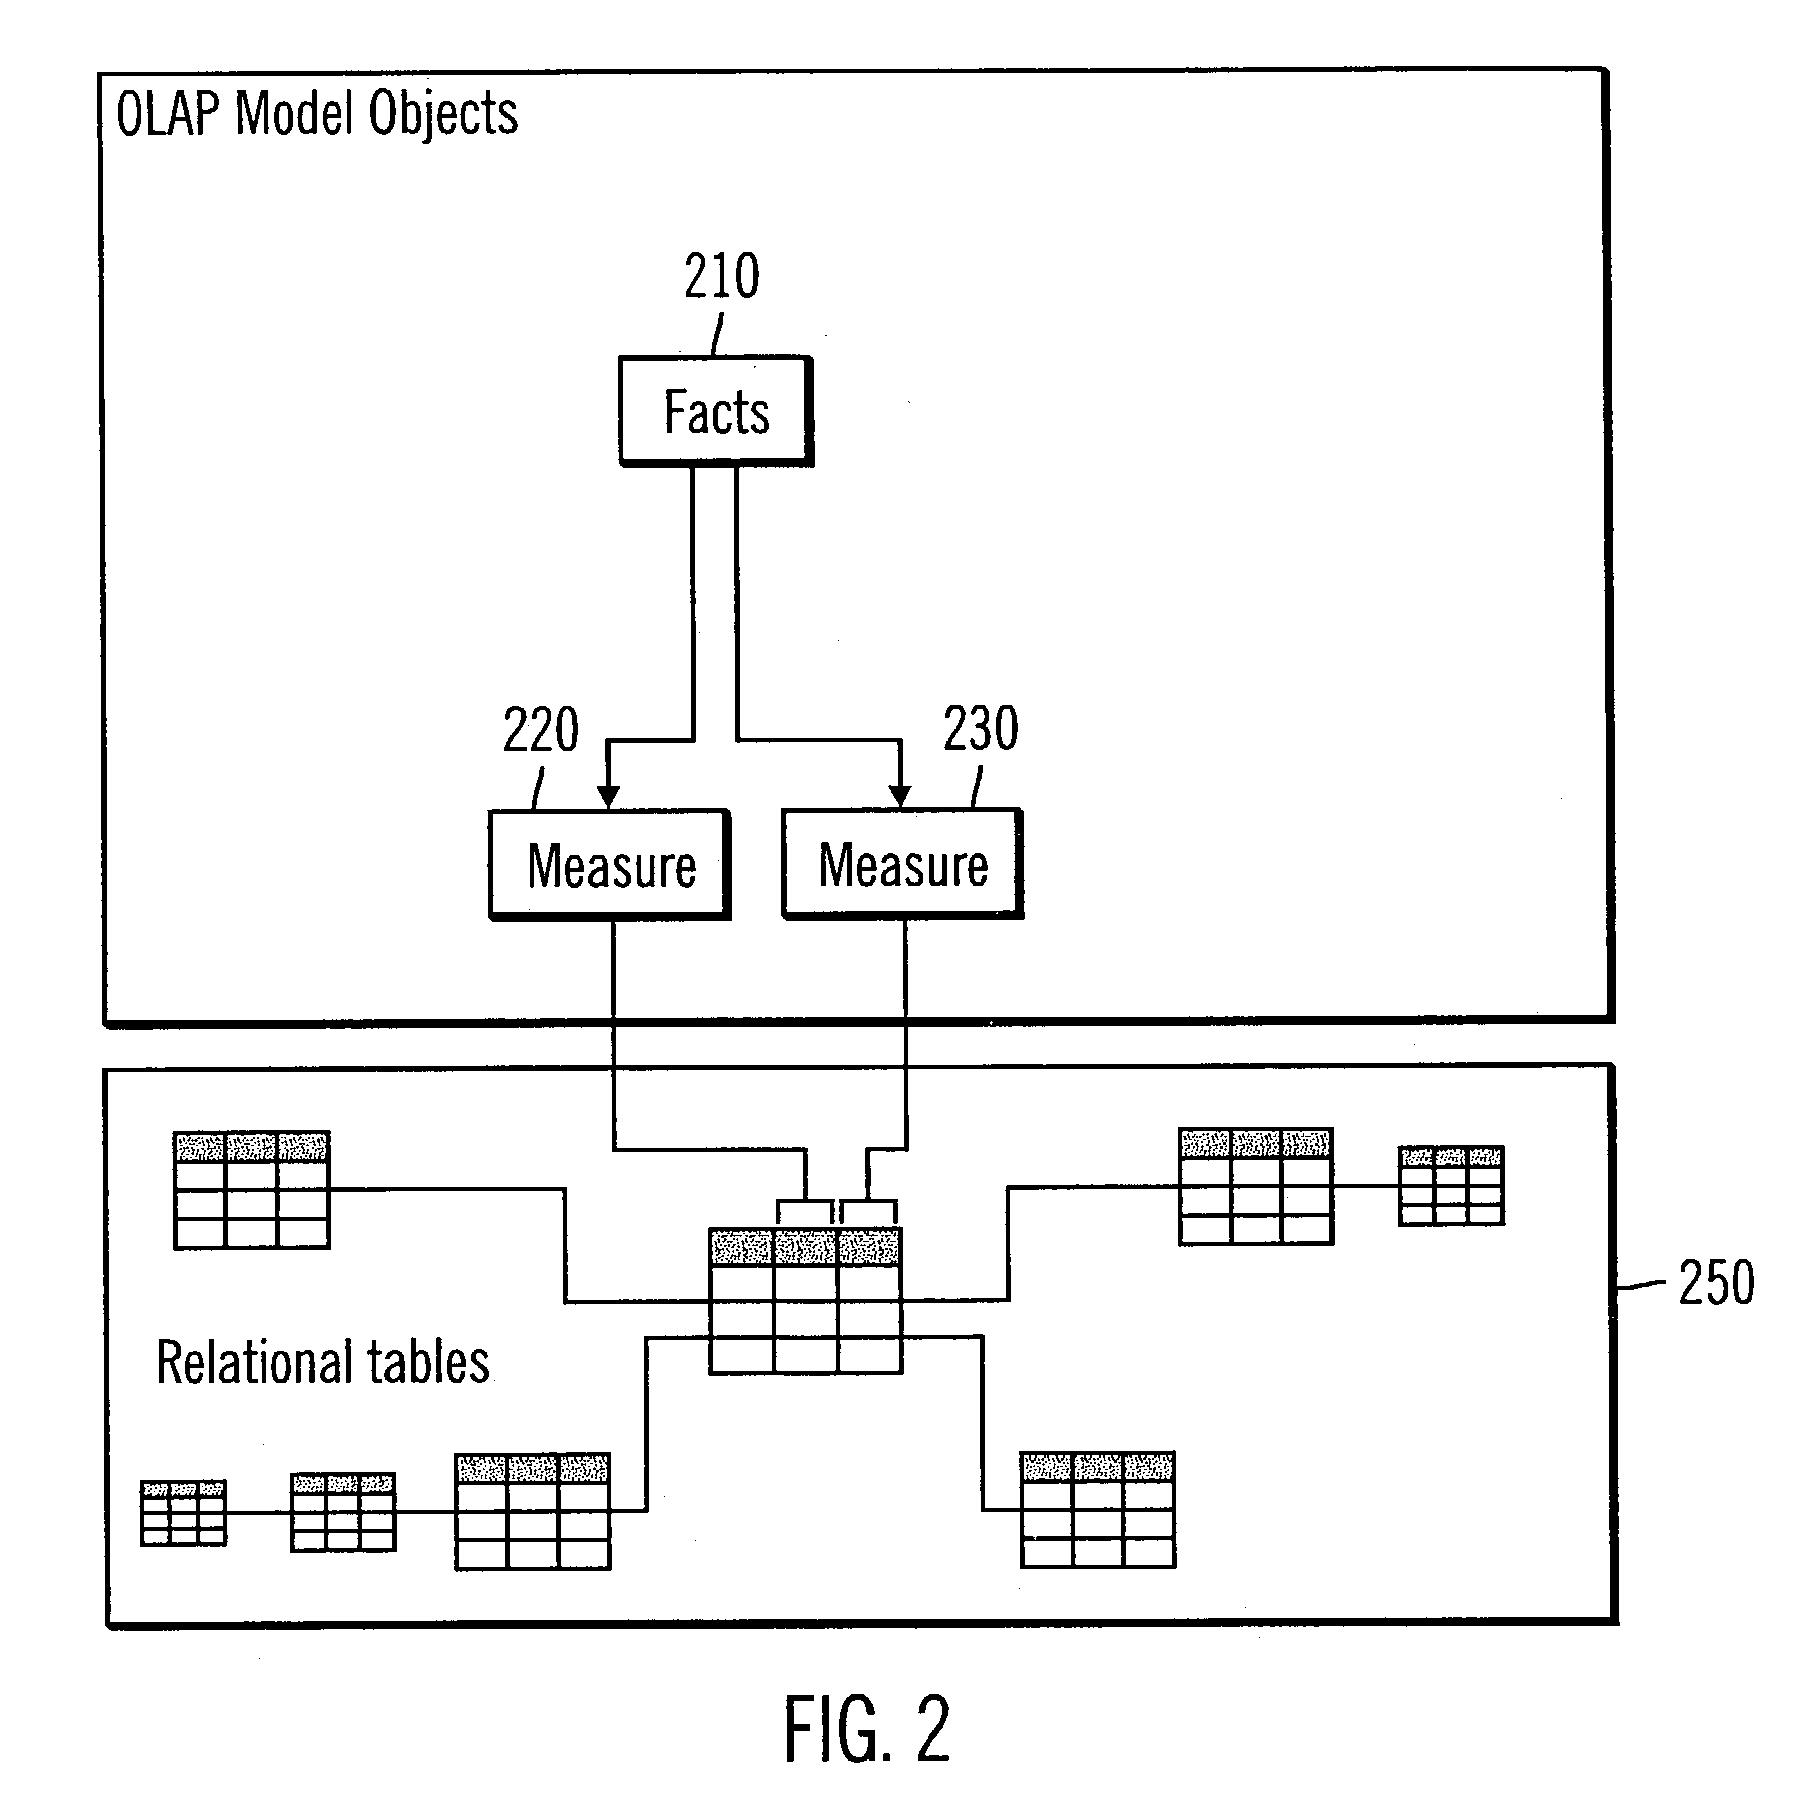 Method, system, and program for use of metadata to create multidimensional cubes in a relational database